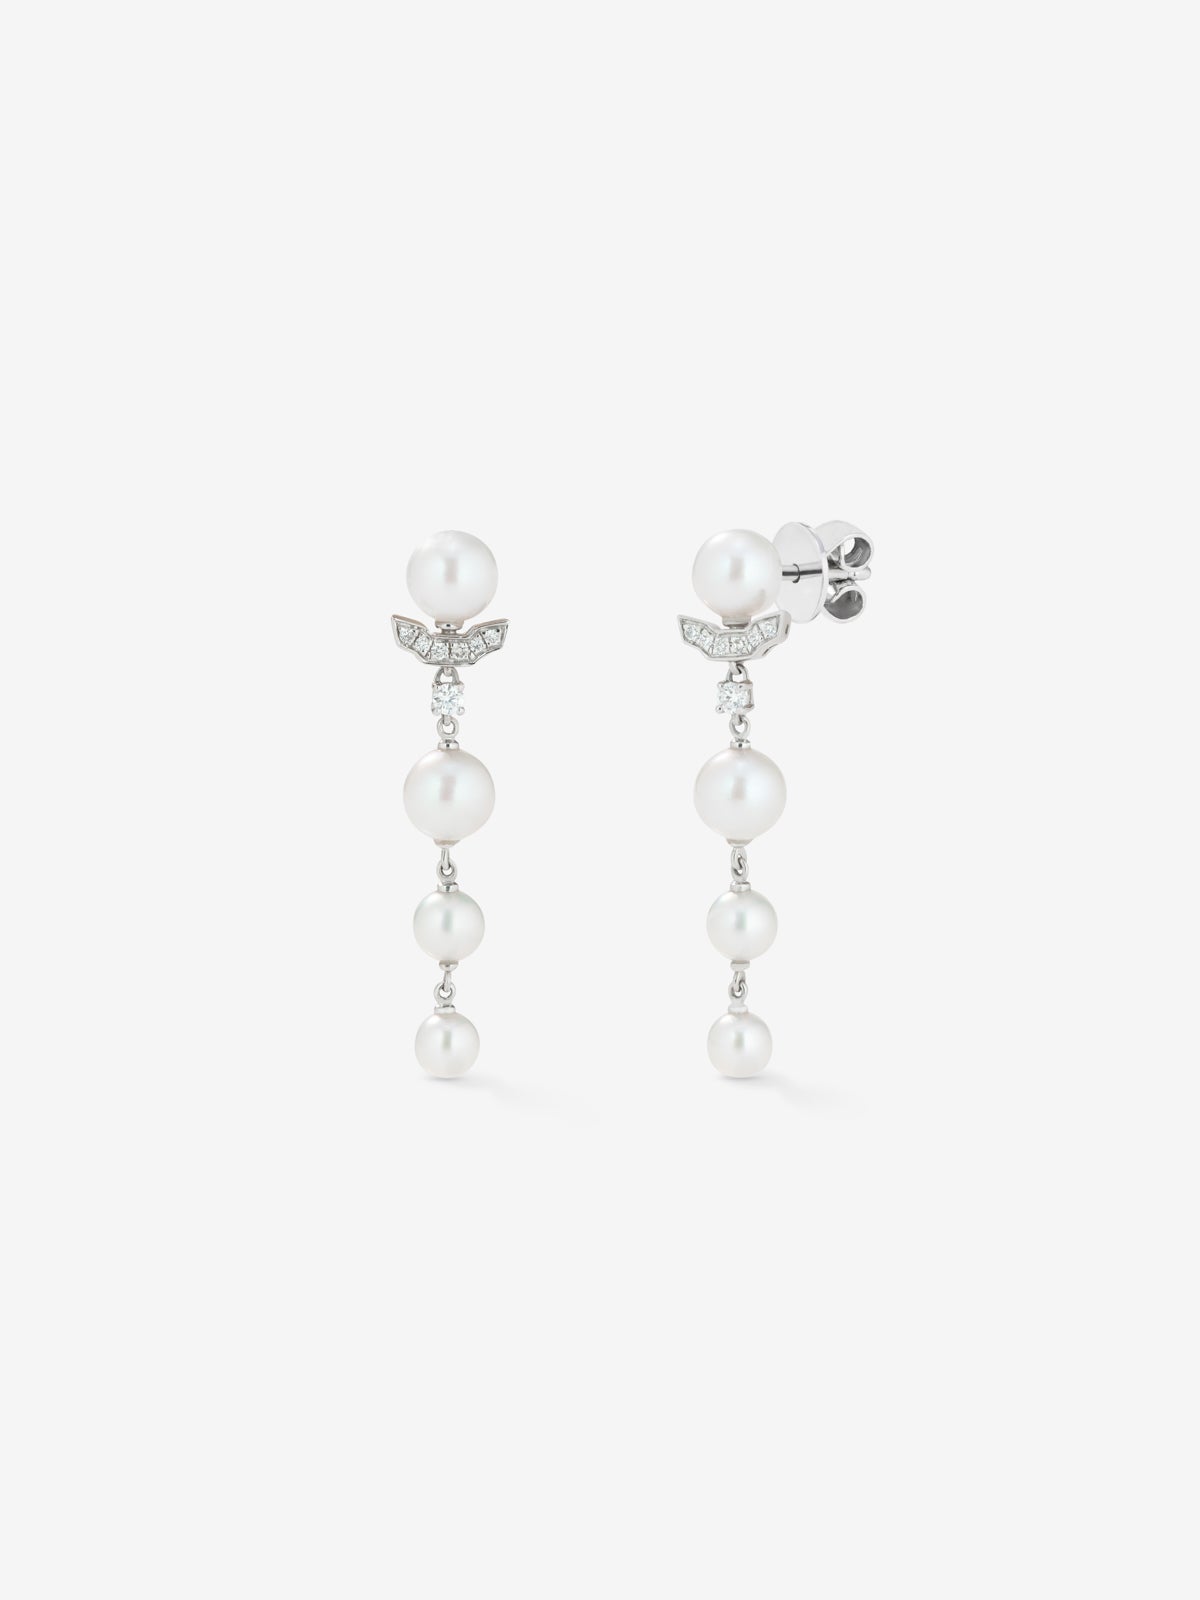 18k white gold long earrings with Akoya pearls and diamonds